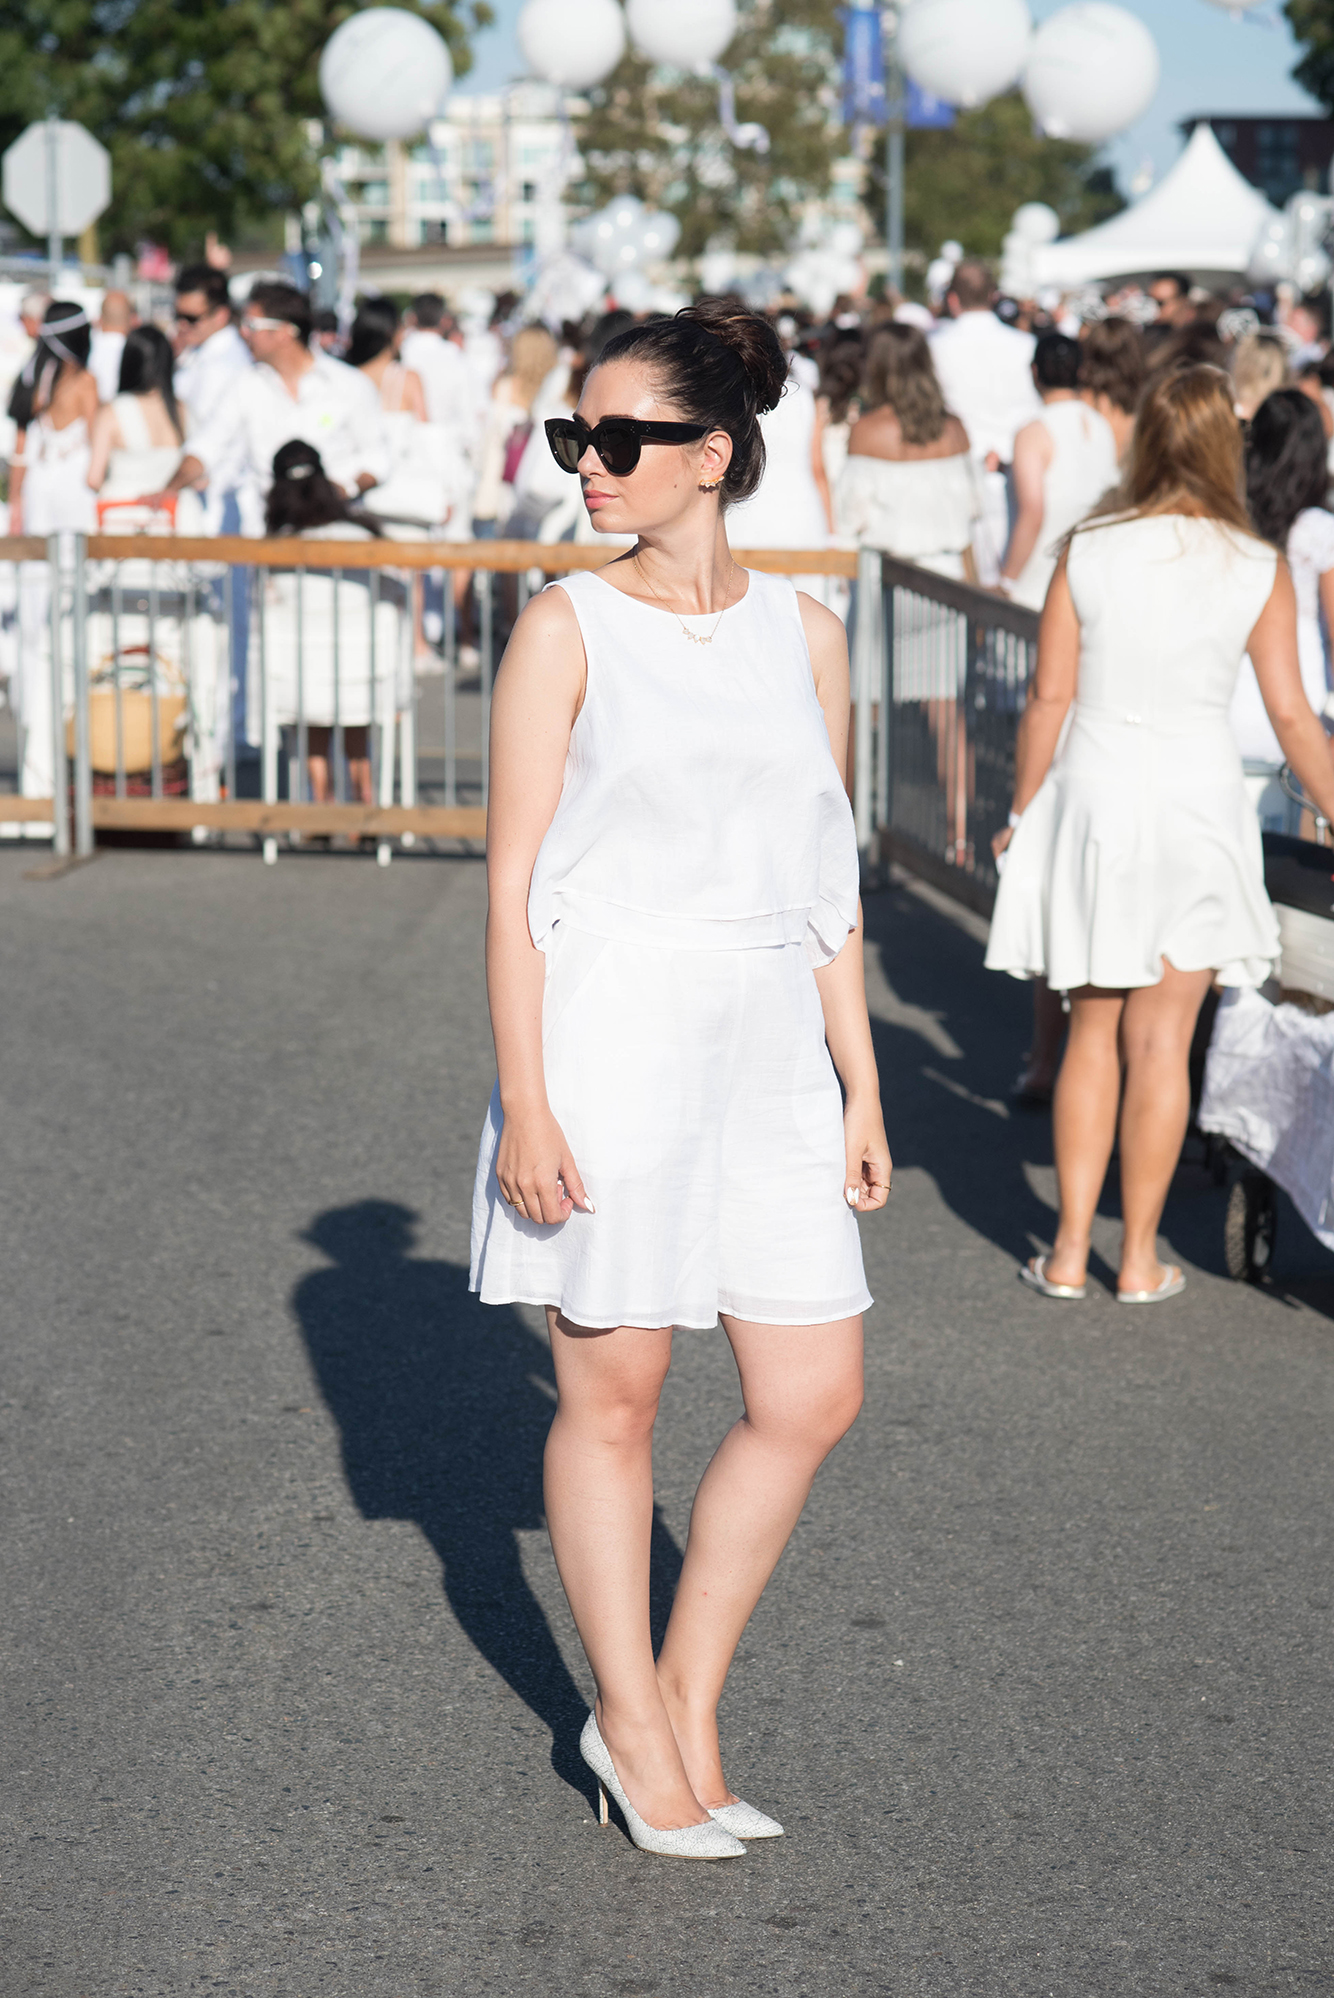 coco-and-vera-top-vancouver-style-blog-top-canadian-style-blog-top-blogger-diner-en-blanc-outfit-debvan